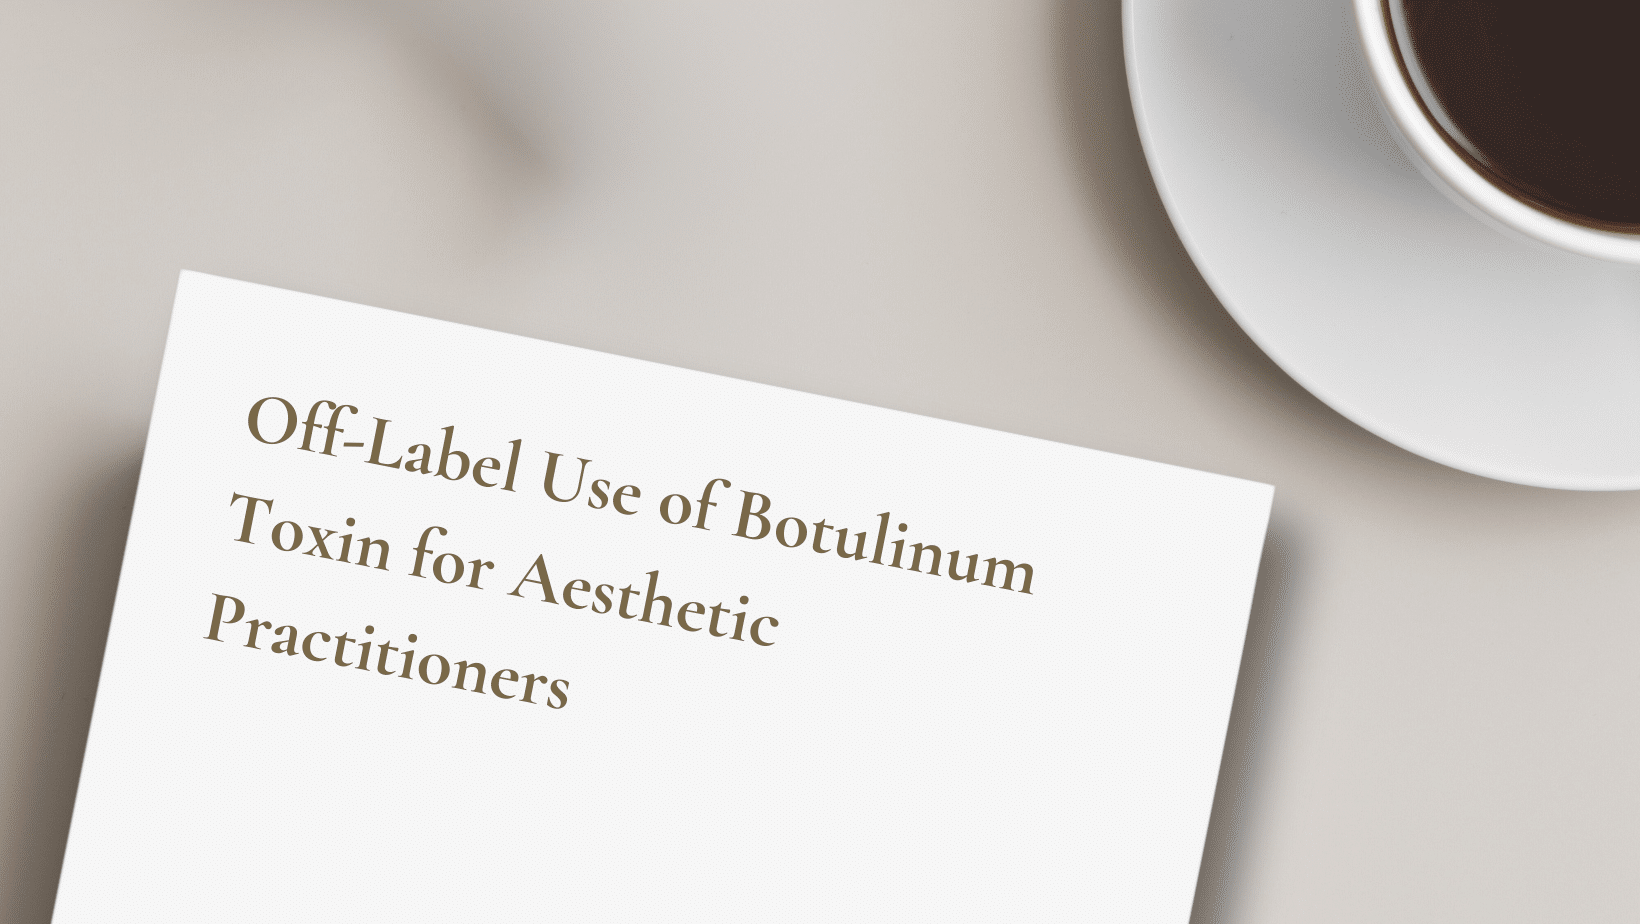 Announcement: Co-authored Paper on Off-Label Use of Botulinum Toxin for Aesthetic Doctors 